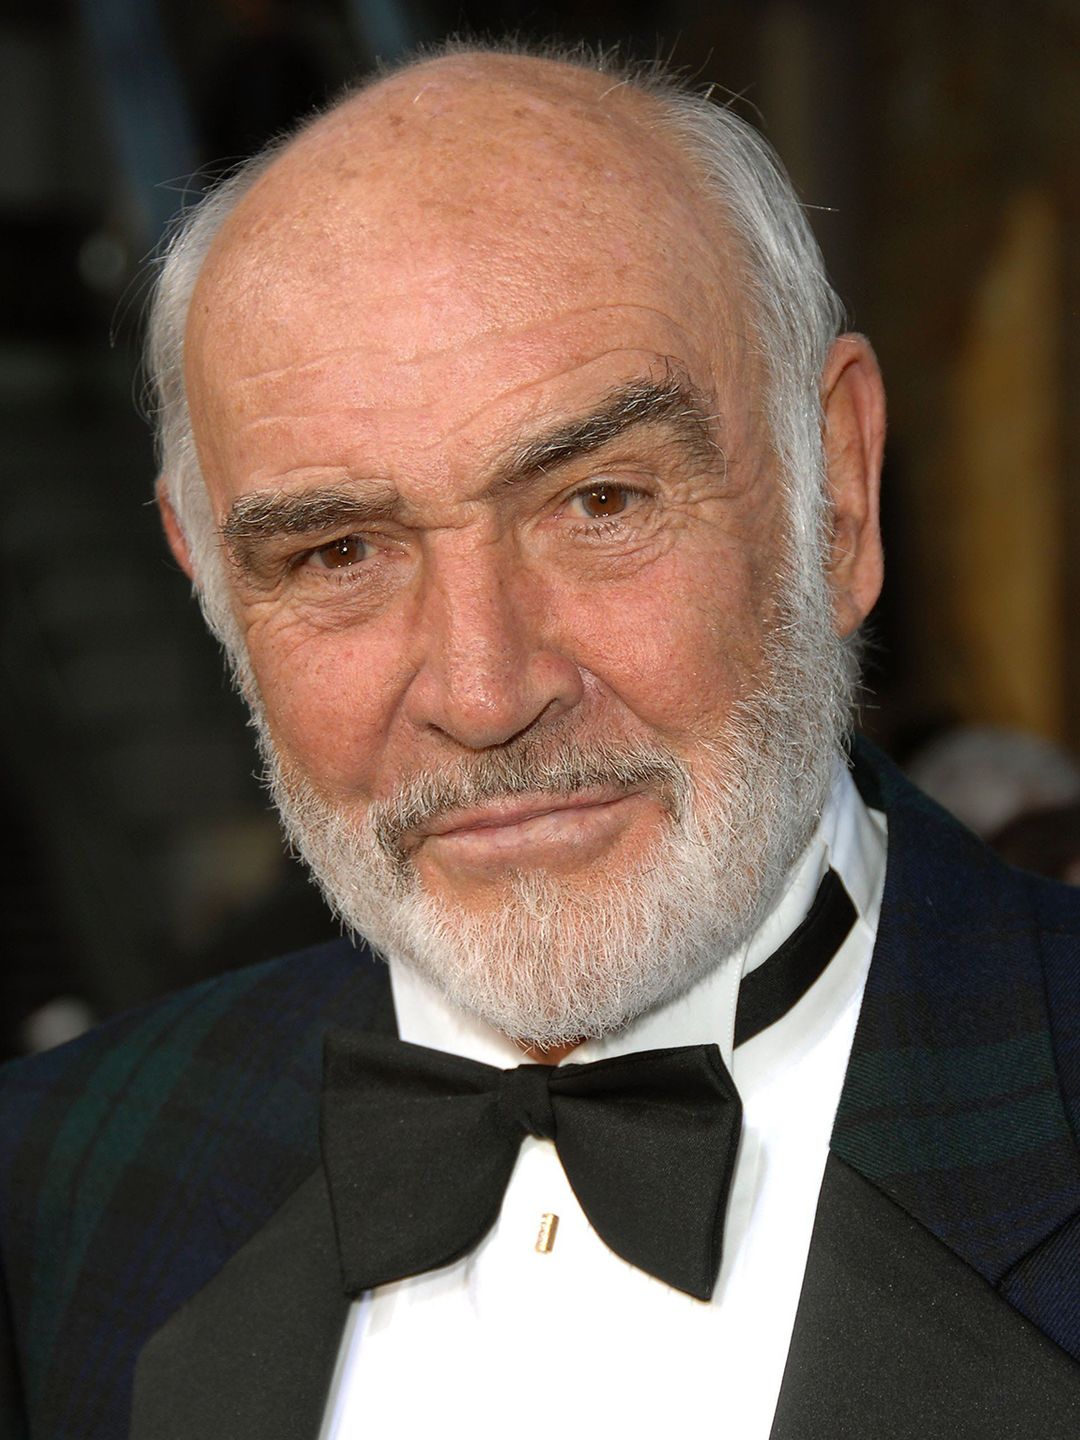 Sean Connery who are his parents